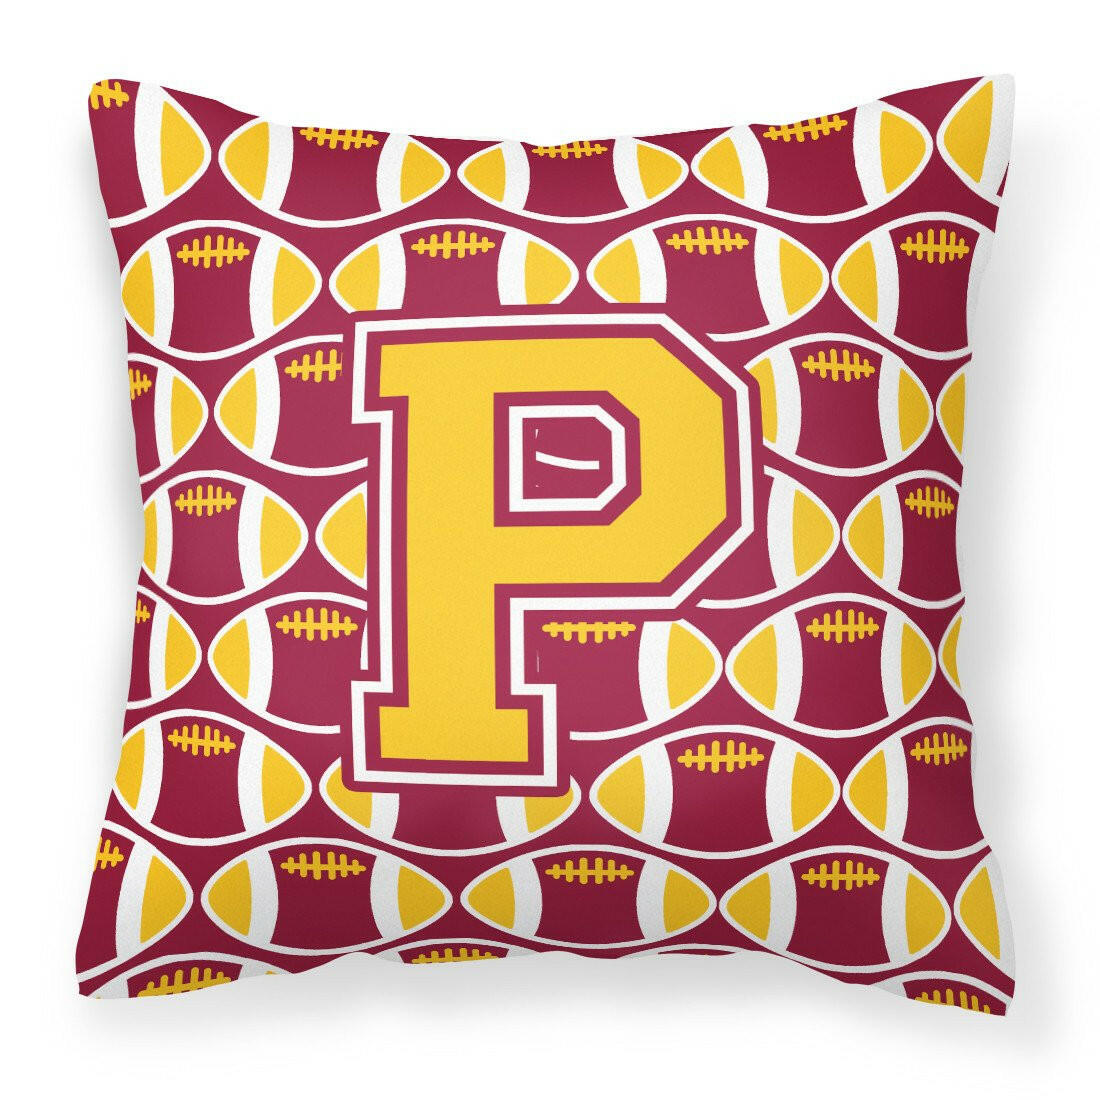 Letter P Football Maroon and Gold Fabric Decorative Pillow CJ1081-PPW1414 by Caroline's Treasures